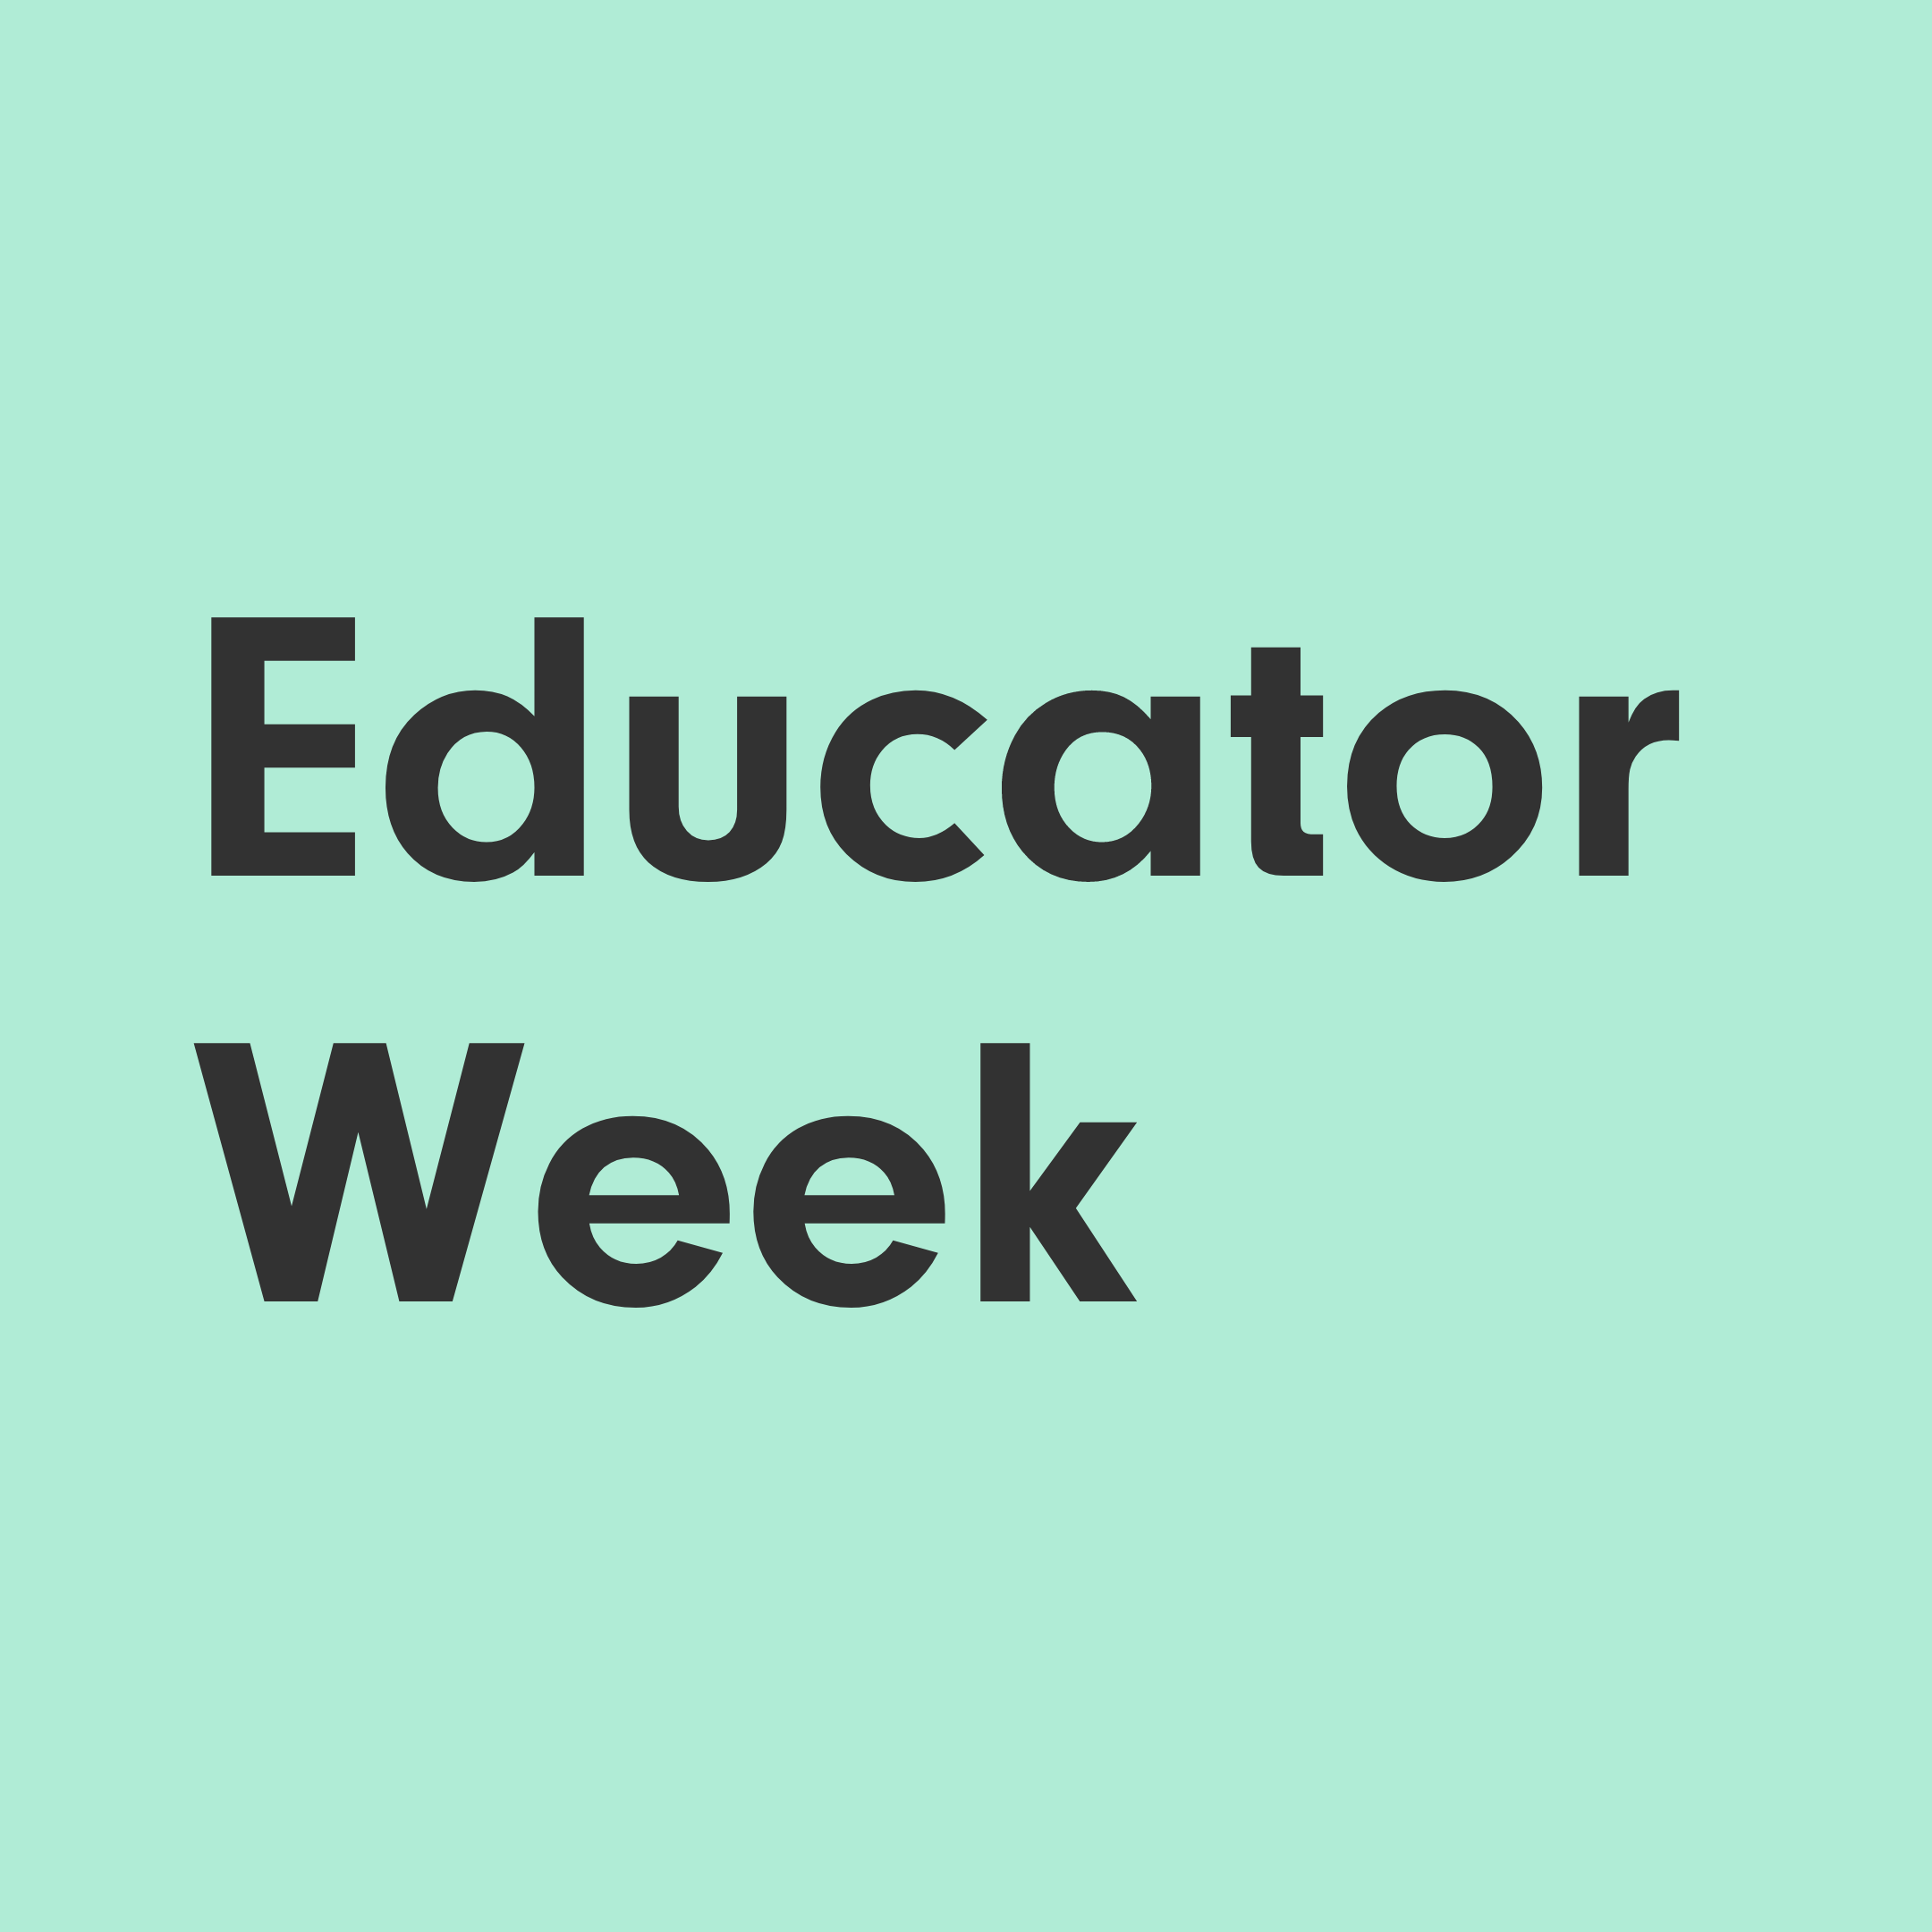 A light green graphic image with dark text that says "Educator Week"